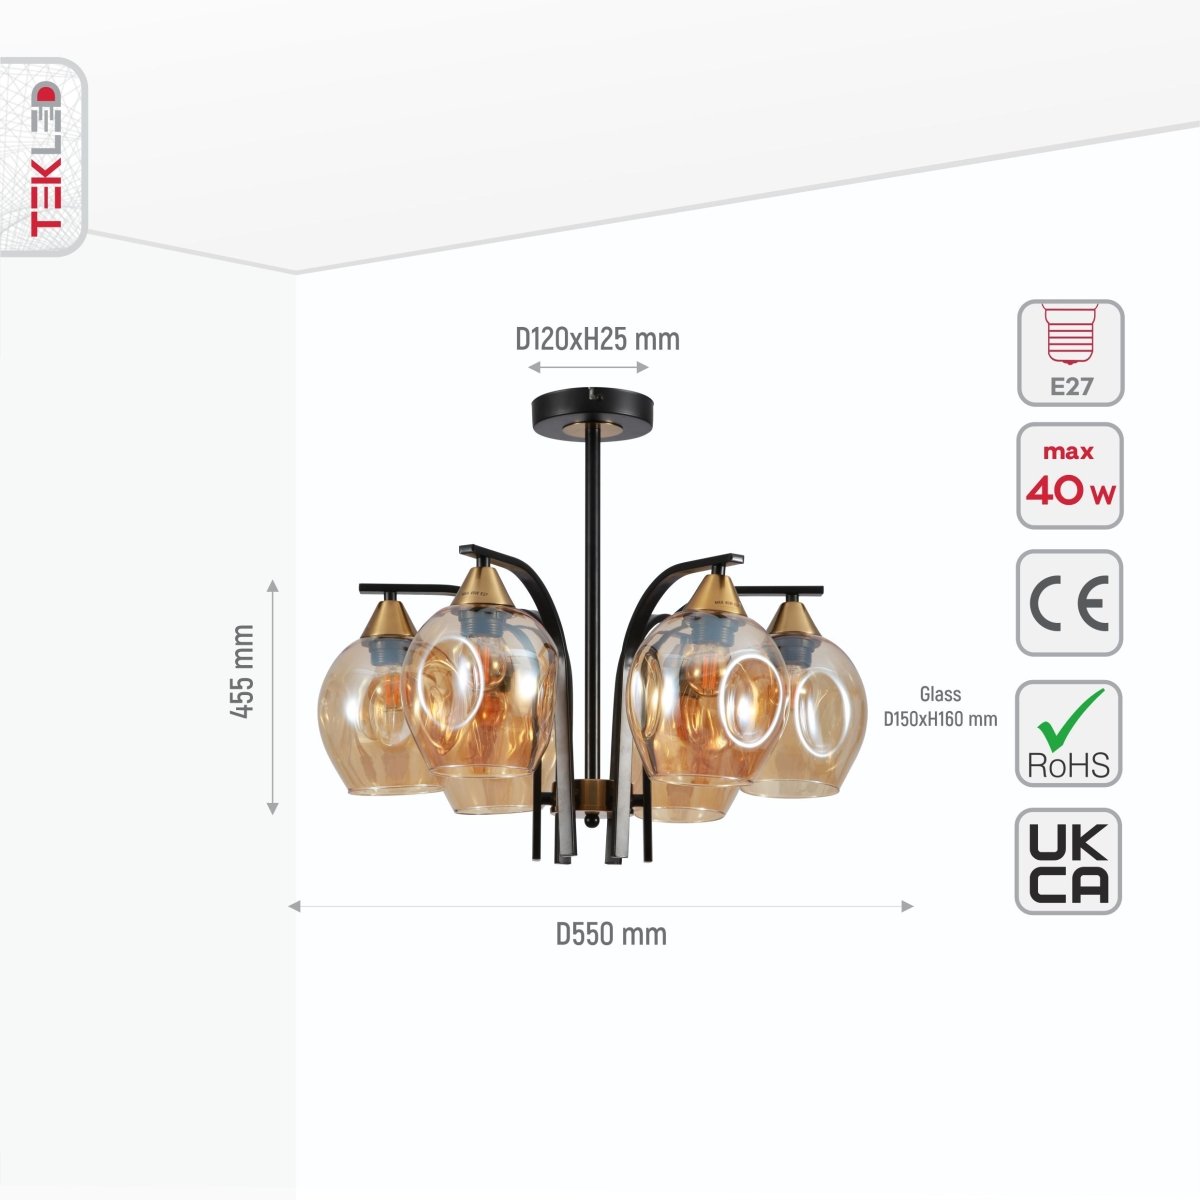 Size and specs of Snowdrop Amber Glass Black Body Semi Flush Ceiling Light with 6xE27 Fittings | TEKLED 159-17422